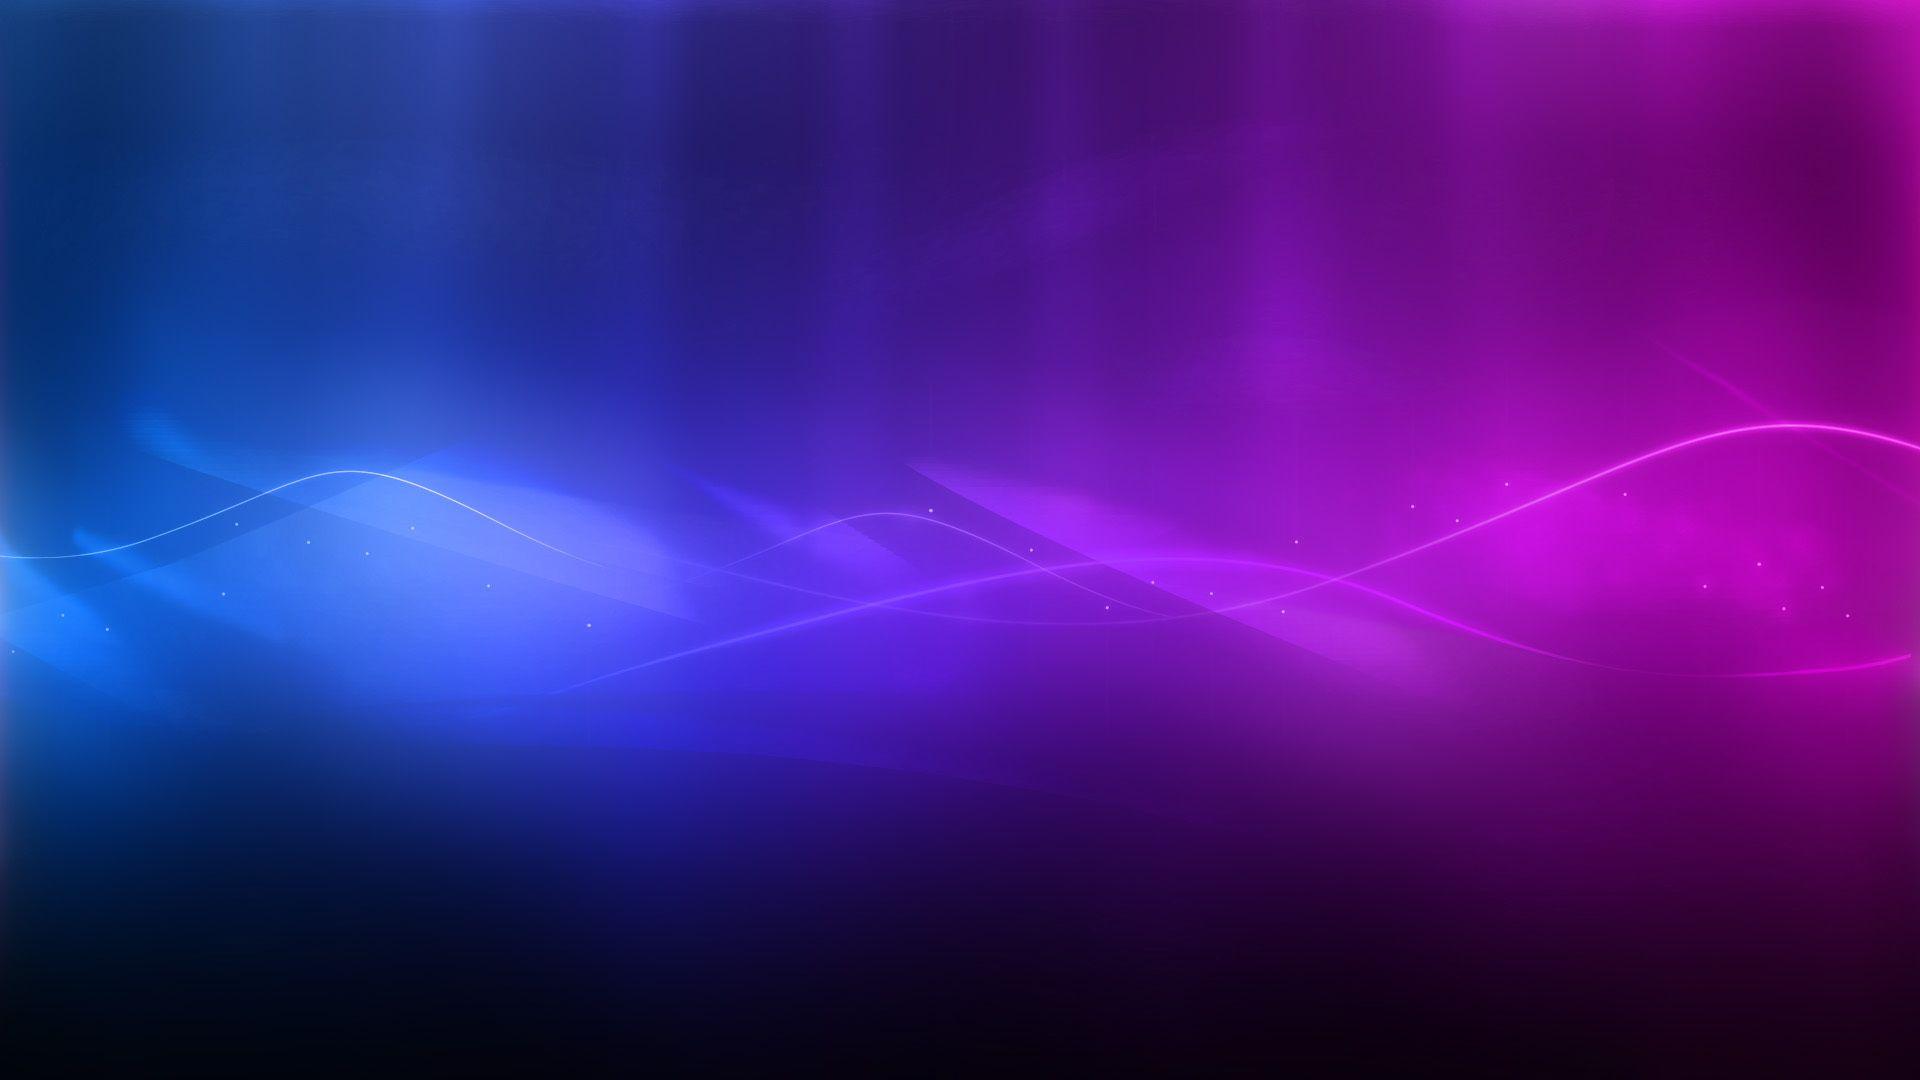 Wallpaper For > Neon Purple And Blue Background